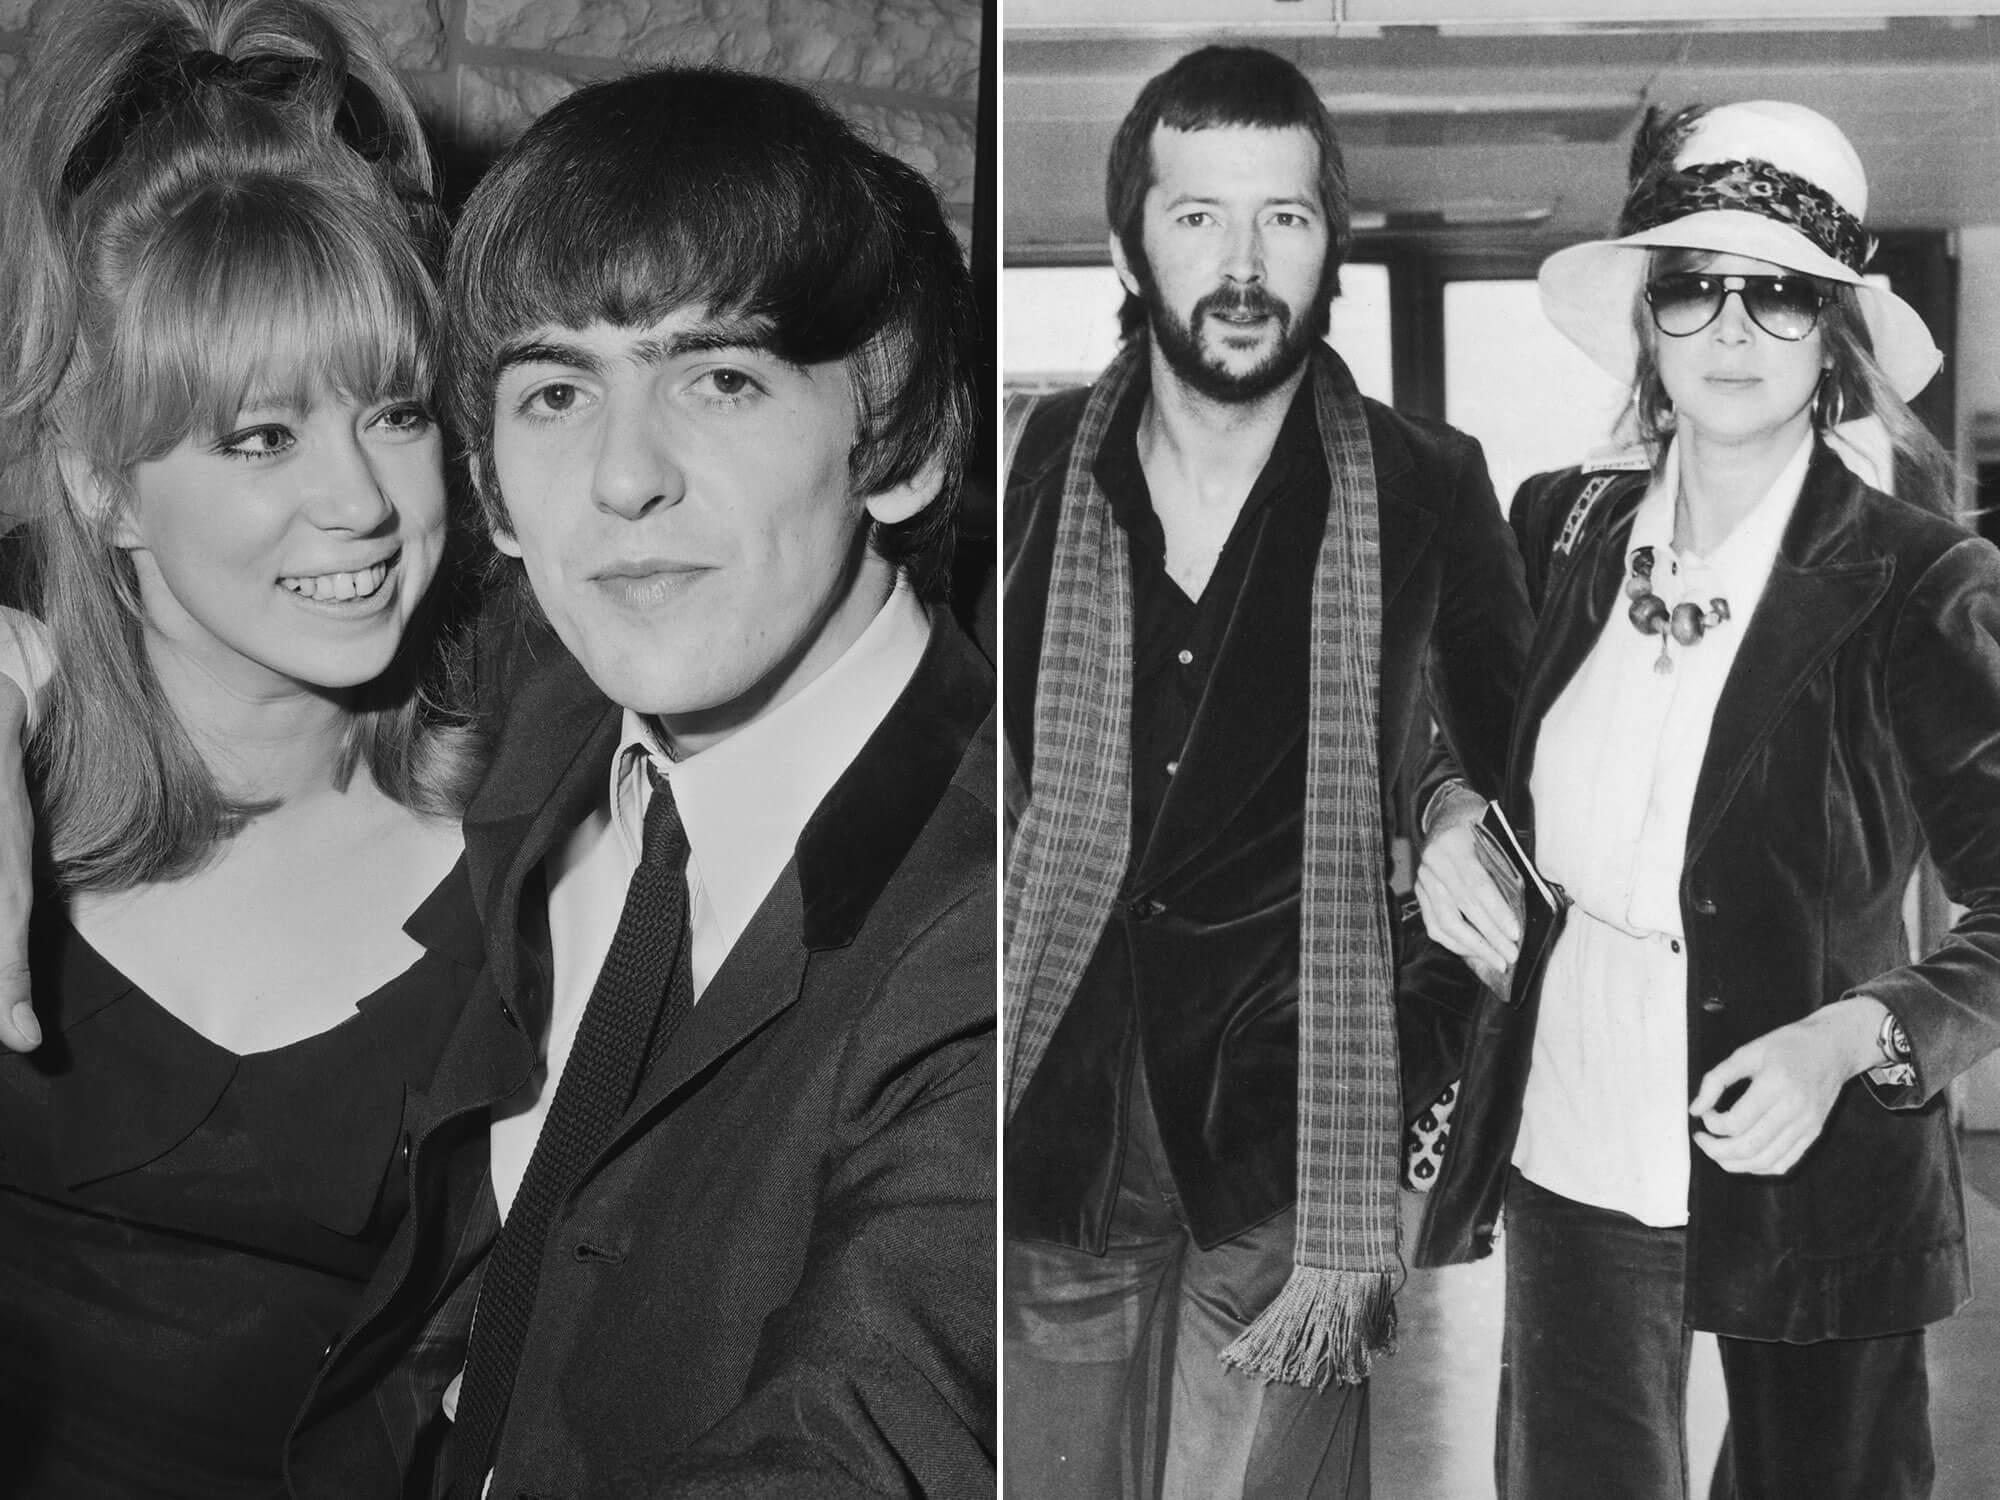 [L-R] Pattie Boyd with George Harrison, and Pattie Boyd with Eric Clapton